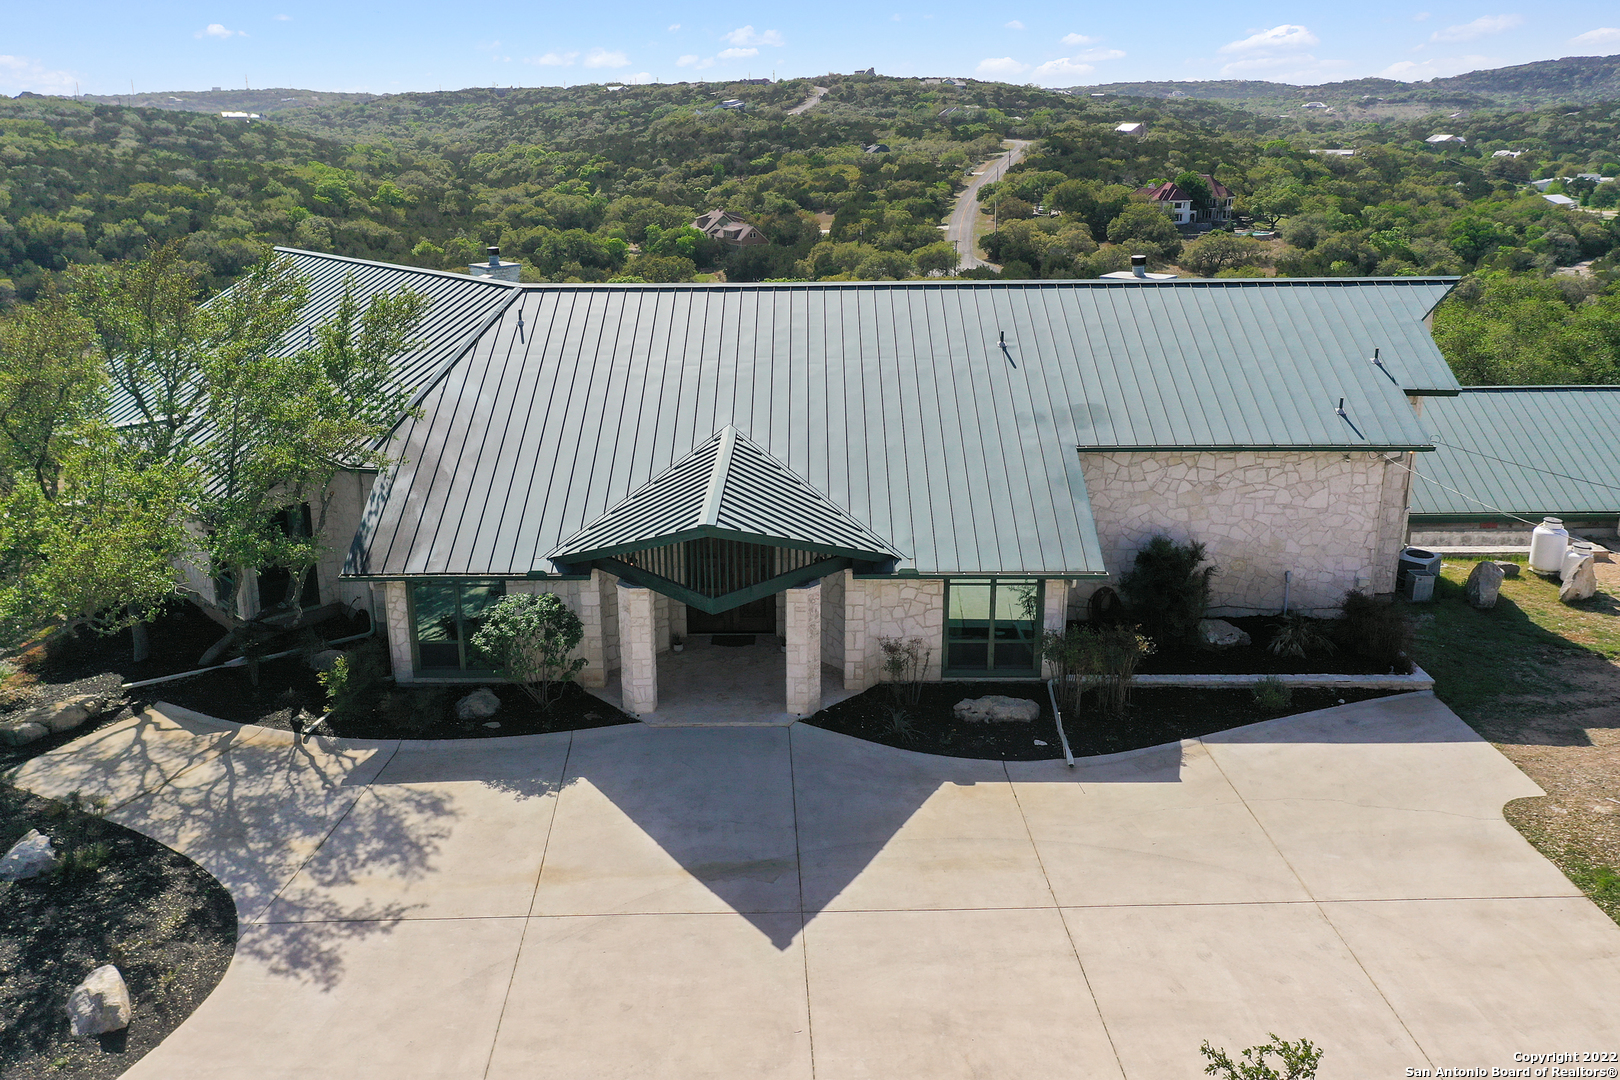 This gorgeous estate sits on approximately 11.68 acres and offers stunning views of the Texas hill country. Custom built, this home showcases spectacular interior details and has been meticulously maintained. Upon arrival, an extended driveway guides you to the entrance and additional parking. Curb appeal is a given with delicate landscaping, greenery, and a stone exterior. Inside, soaring ceilings are highlighted by wooden details, picture windows, and stone accents. A grand entrance guides you to the formal living space with access to the balcony, which overlooks mature shade trees and Texas blue skies. A designated dining space across the way makes for elegant entertaining with custom cabinetry fit for a bar area or China display. In the casual living area, postcard-perfect views can be enjoyed from the interior with a cozy stone fireplace. This quaint space provides peace and tranquility, perfect for spending time with loved ones. The household chef will appreciate the gourmet eat-in kitchen. The kitchen comes equipped with all-white cabinetry, complementing granite counters, backsplash, stainless steel appliances, a gas range cooktop, and an industrial-like vent hood. Office space can be found off the entrance and offers French doors for added privacy. Retreat to the luxurious-sized primary showcasing vaulted ceilings, wood flooring, fireplace, and reading nook. The spa-like en suite has dual sinks with an elongated vanity, walk-in shower, and jacuzzi tub. The walk-in closet was built for a shopaholic and for additional storage. Three spacious secondary bedrooms, three baths, 2 half baths, and a generous game room with a bar conclude the interior. A detached, two-story apartment includes separate quarters, with dedicated entrances for each. A full bed and bath can be found upstairs, and the second bed and bath are located in the downstairs quarters. Outside, a covered patio overlooks the stone surrounded by an infinity pool. An outdoor powder bath adds convenience when cooling off during the summer season. A pergola is ideal for resting from the sun's rays. A one-of-a-kind pavilion can be found on the property spanning over 2400 sqft. A fireplace, custom barbecue pit, and a bar add endless possibilities for entertaining! With no near neighbors' insight, this exquisite property is not one to pass up on!